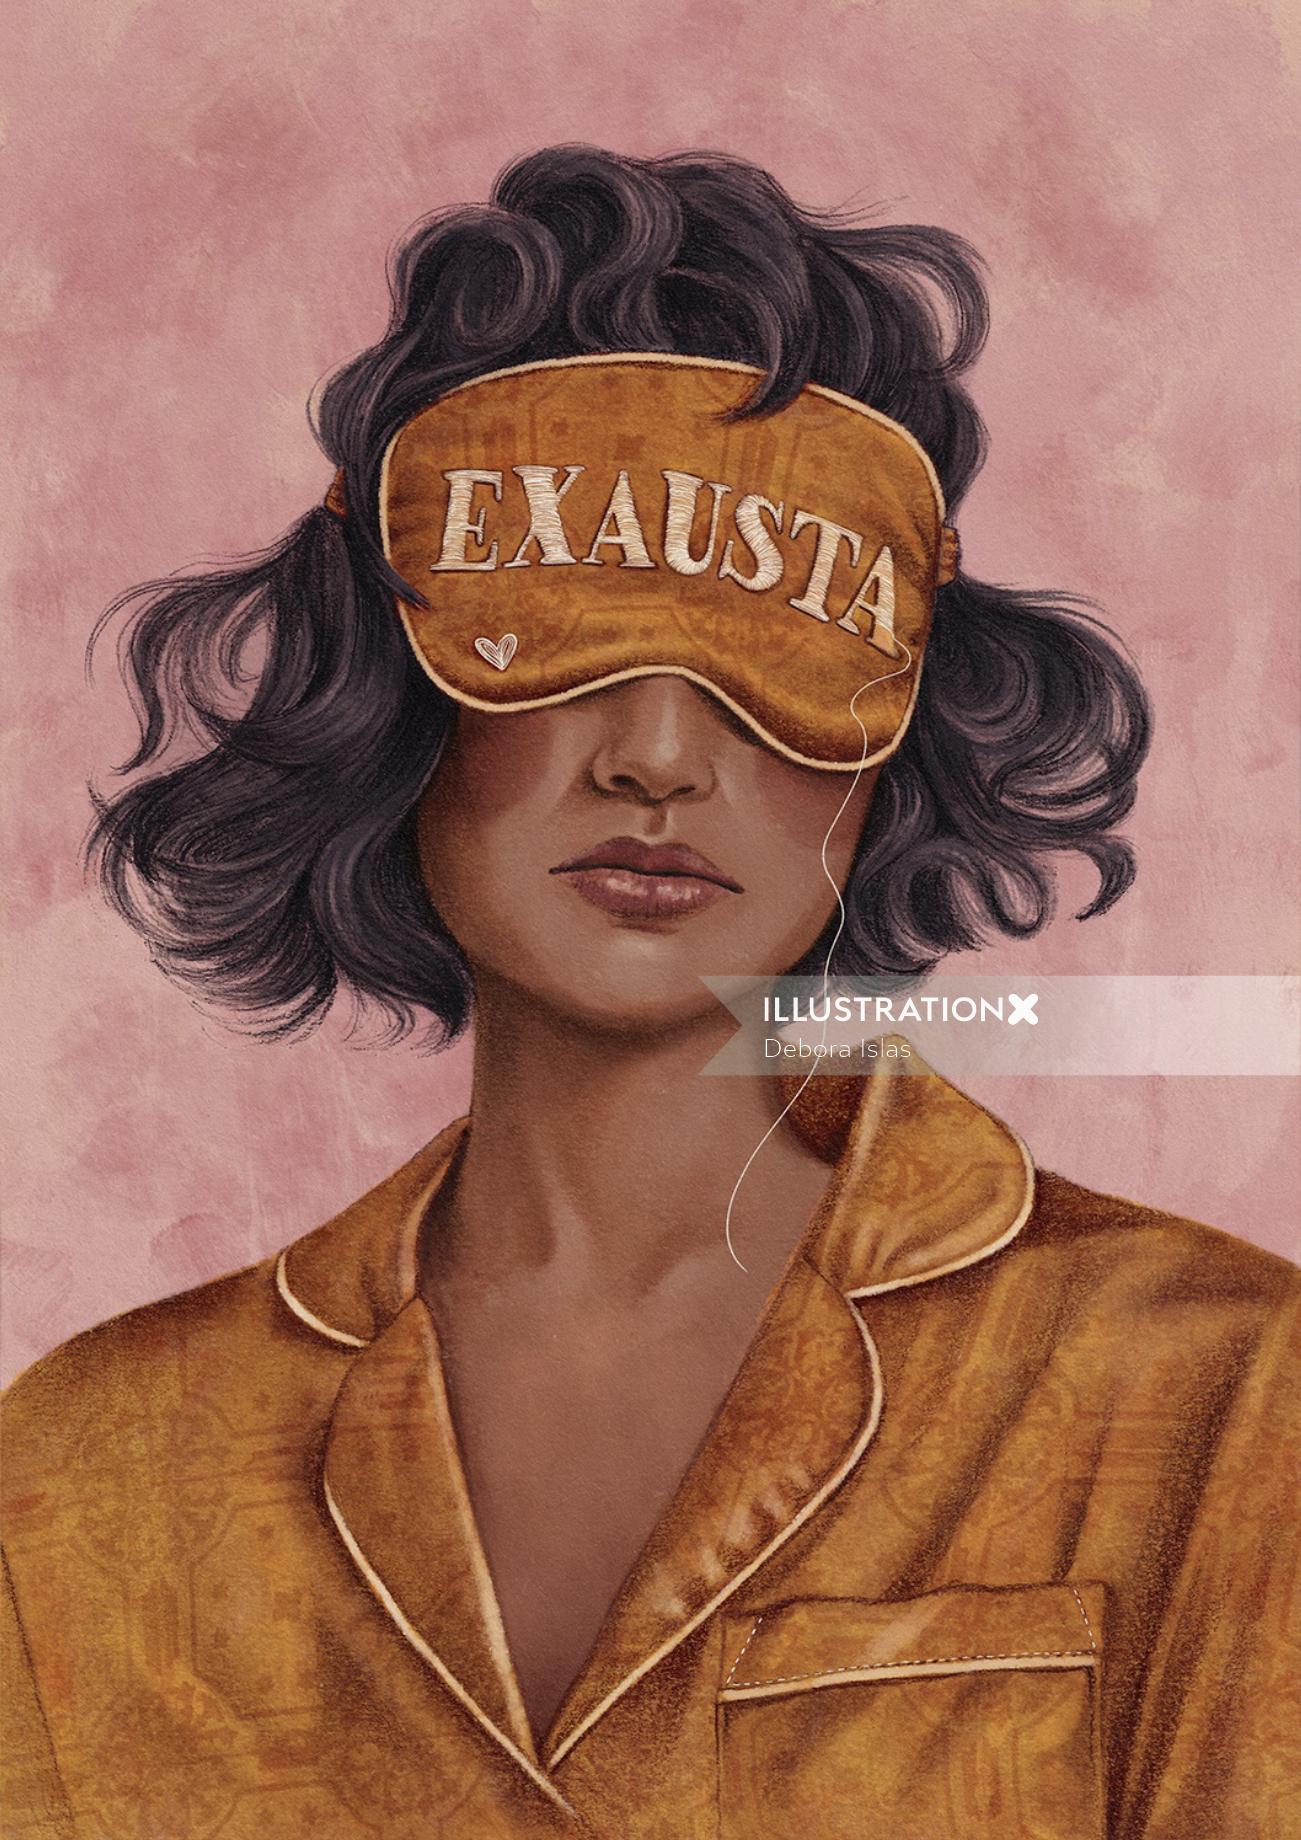 Blindfolded lady shown in a portrait